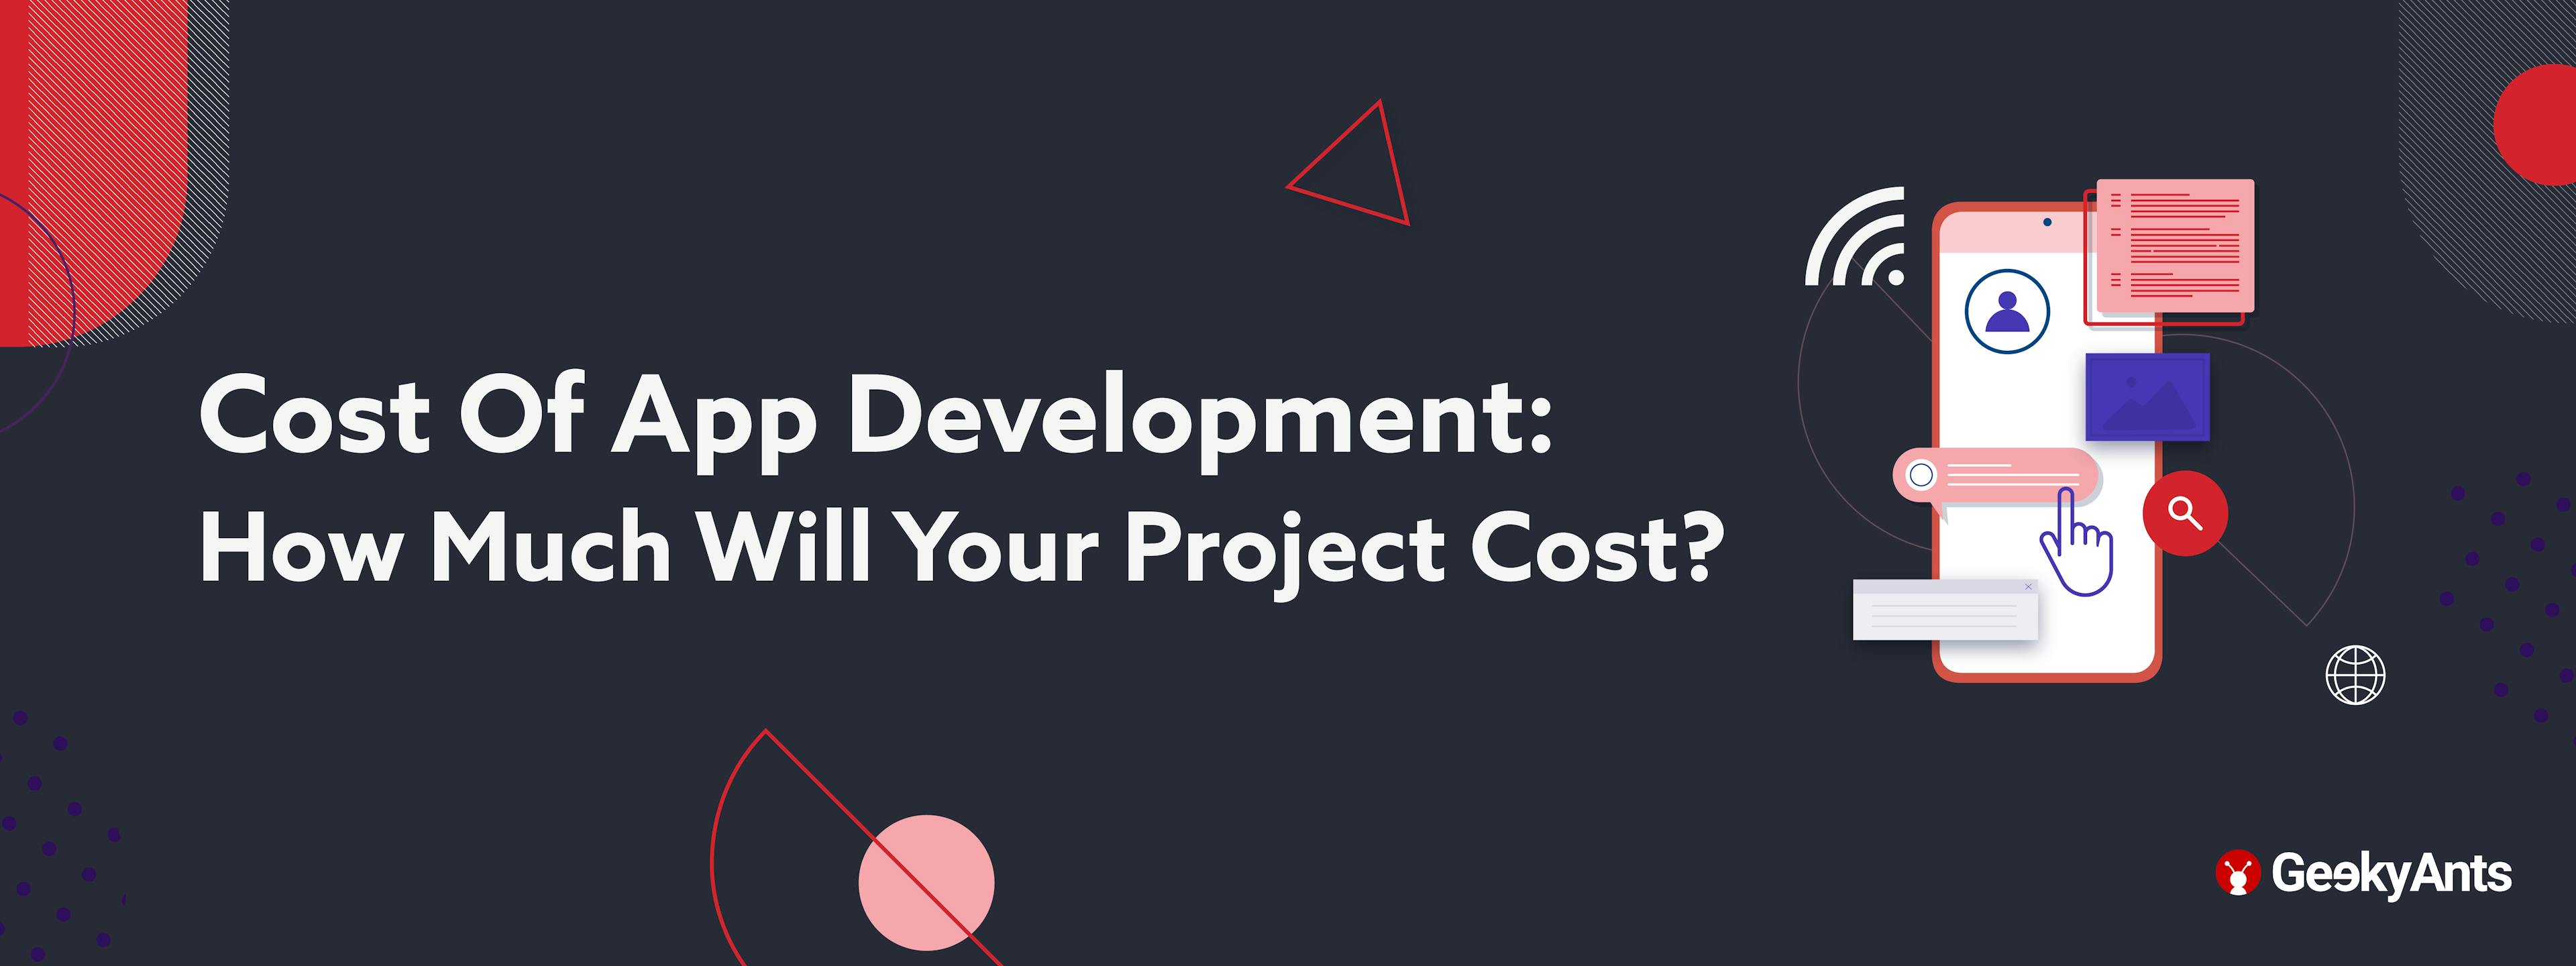 Cost Of App Development: How Much Will Your Project Cost?